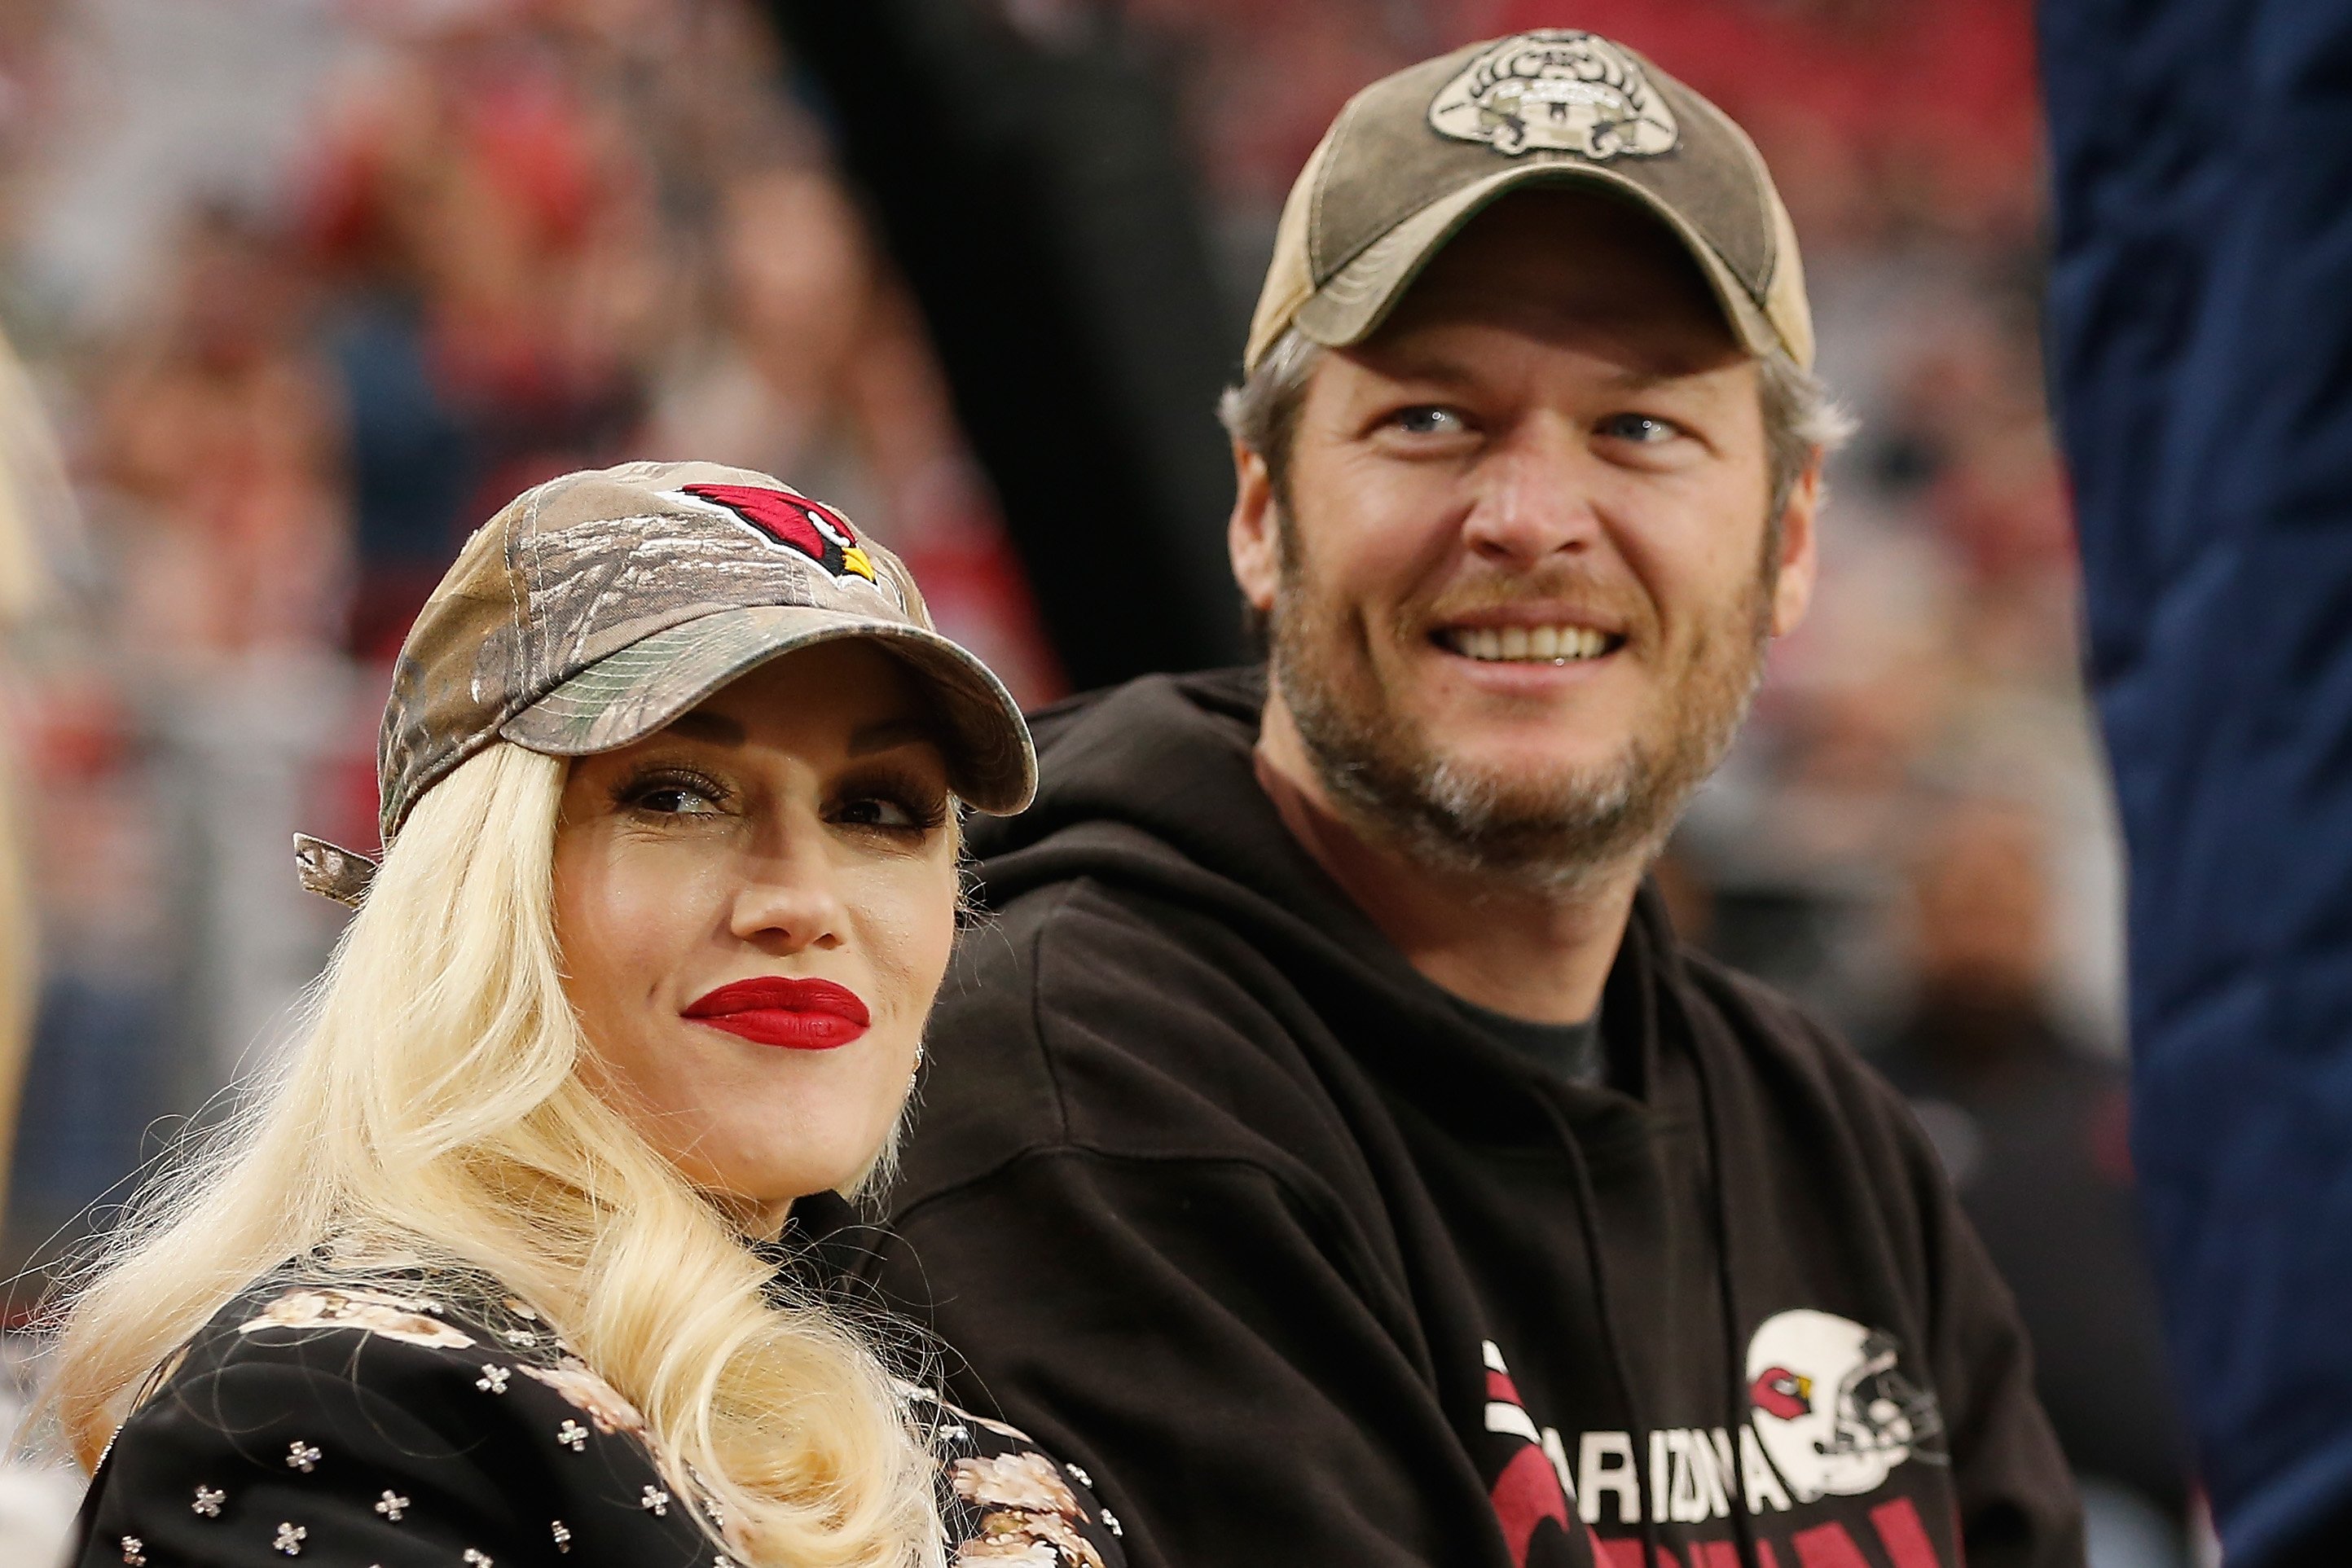 Gwen Stefani and Blake Shelton attend an NFL game in Arizona, 27 December, 2015. | Photo: Getty Images.